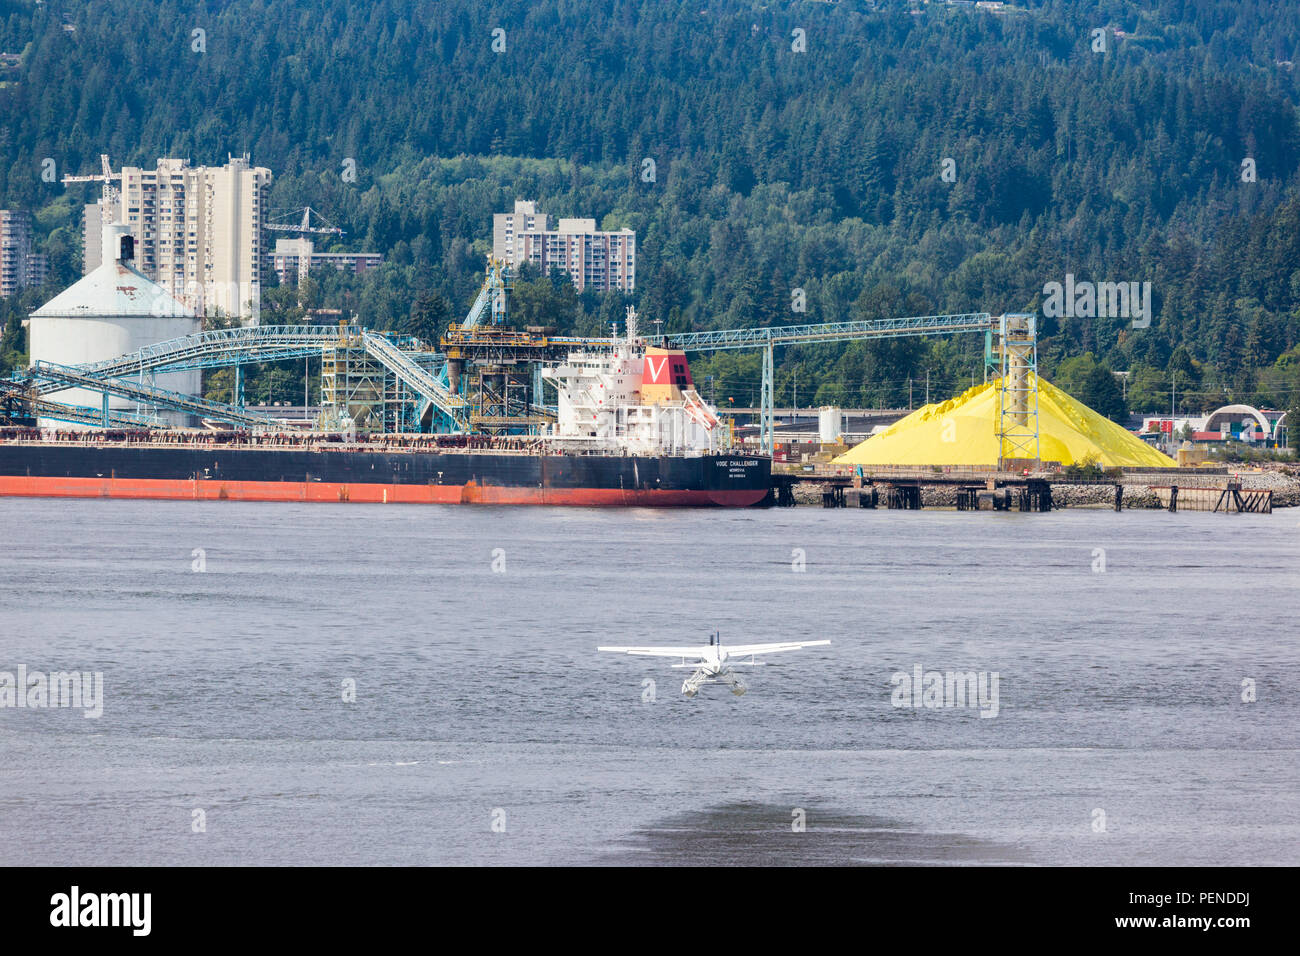 A seaplane taking off towards the pile of sulphur in the harbour at North Vancouver, British Columbia, Canada Stock Photo